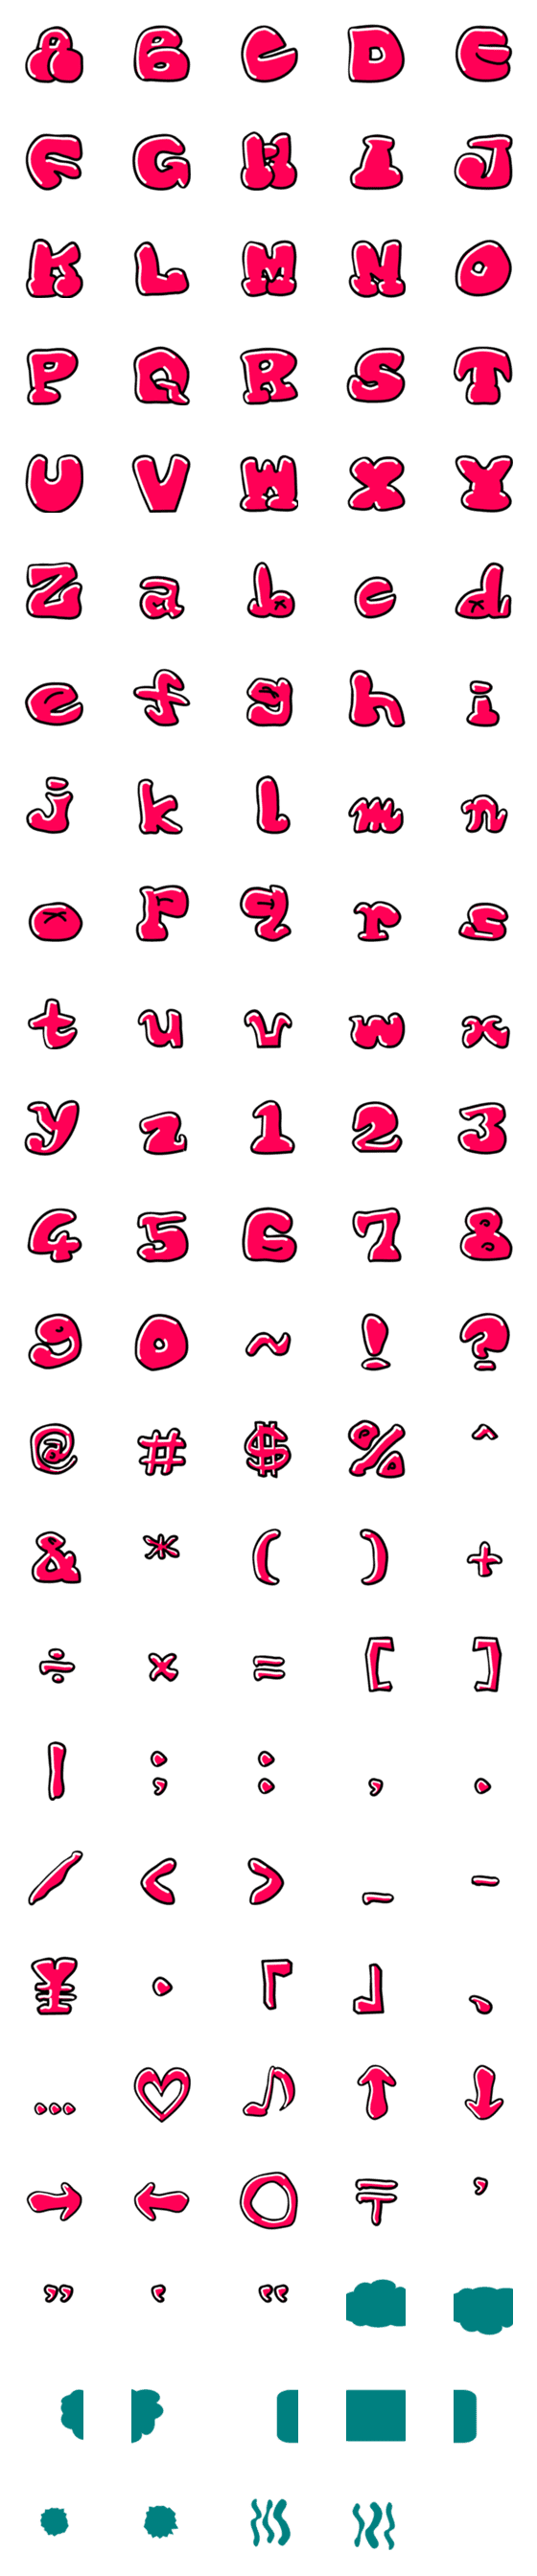 [LINE絵文字]スローアップ風のデコ文字 2の画像一覧